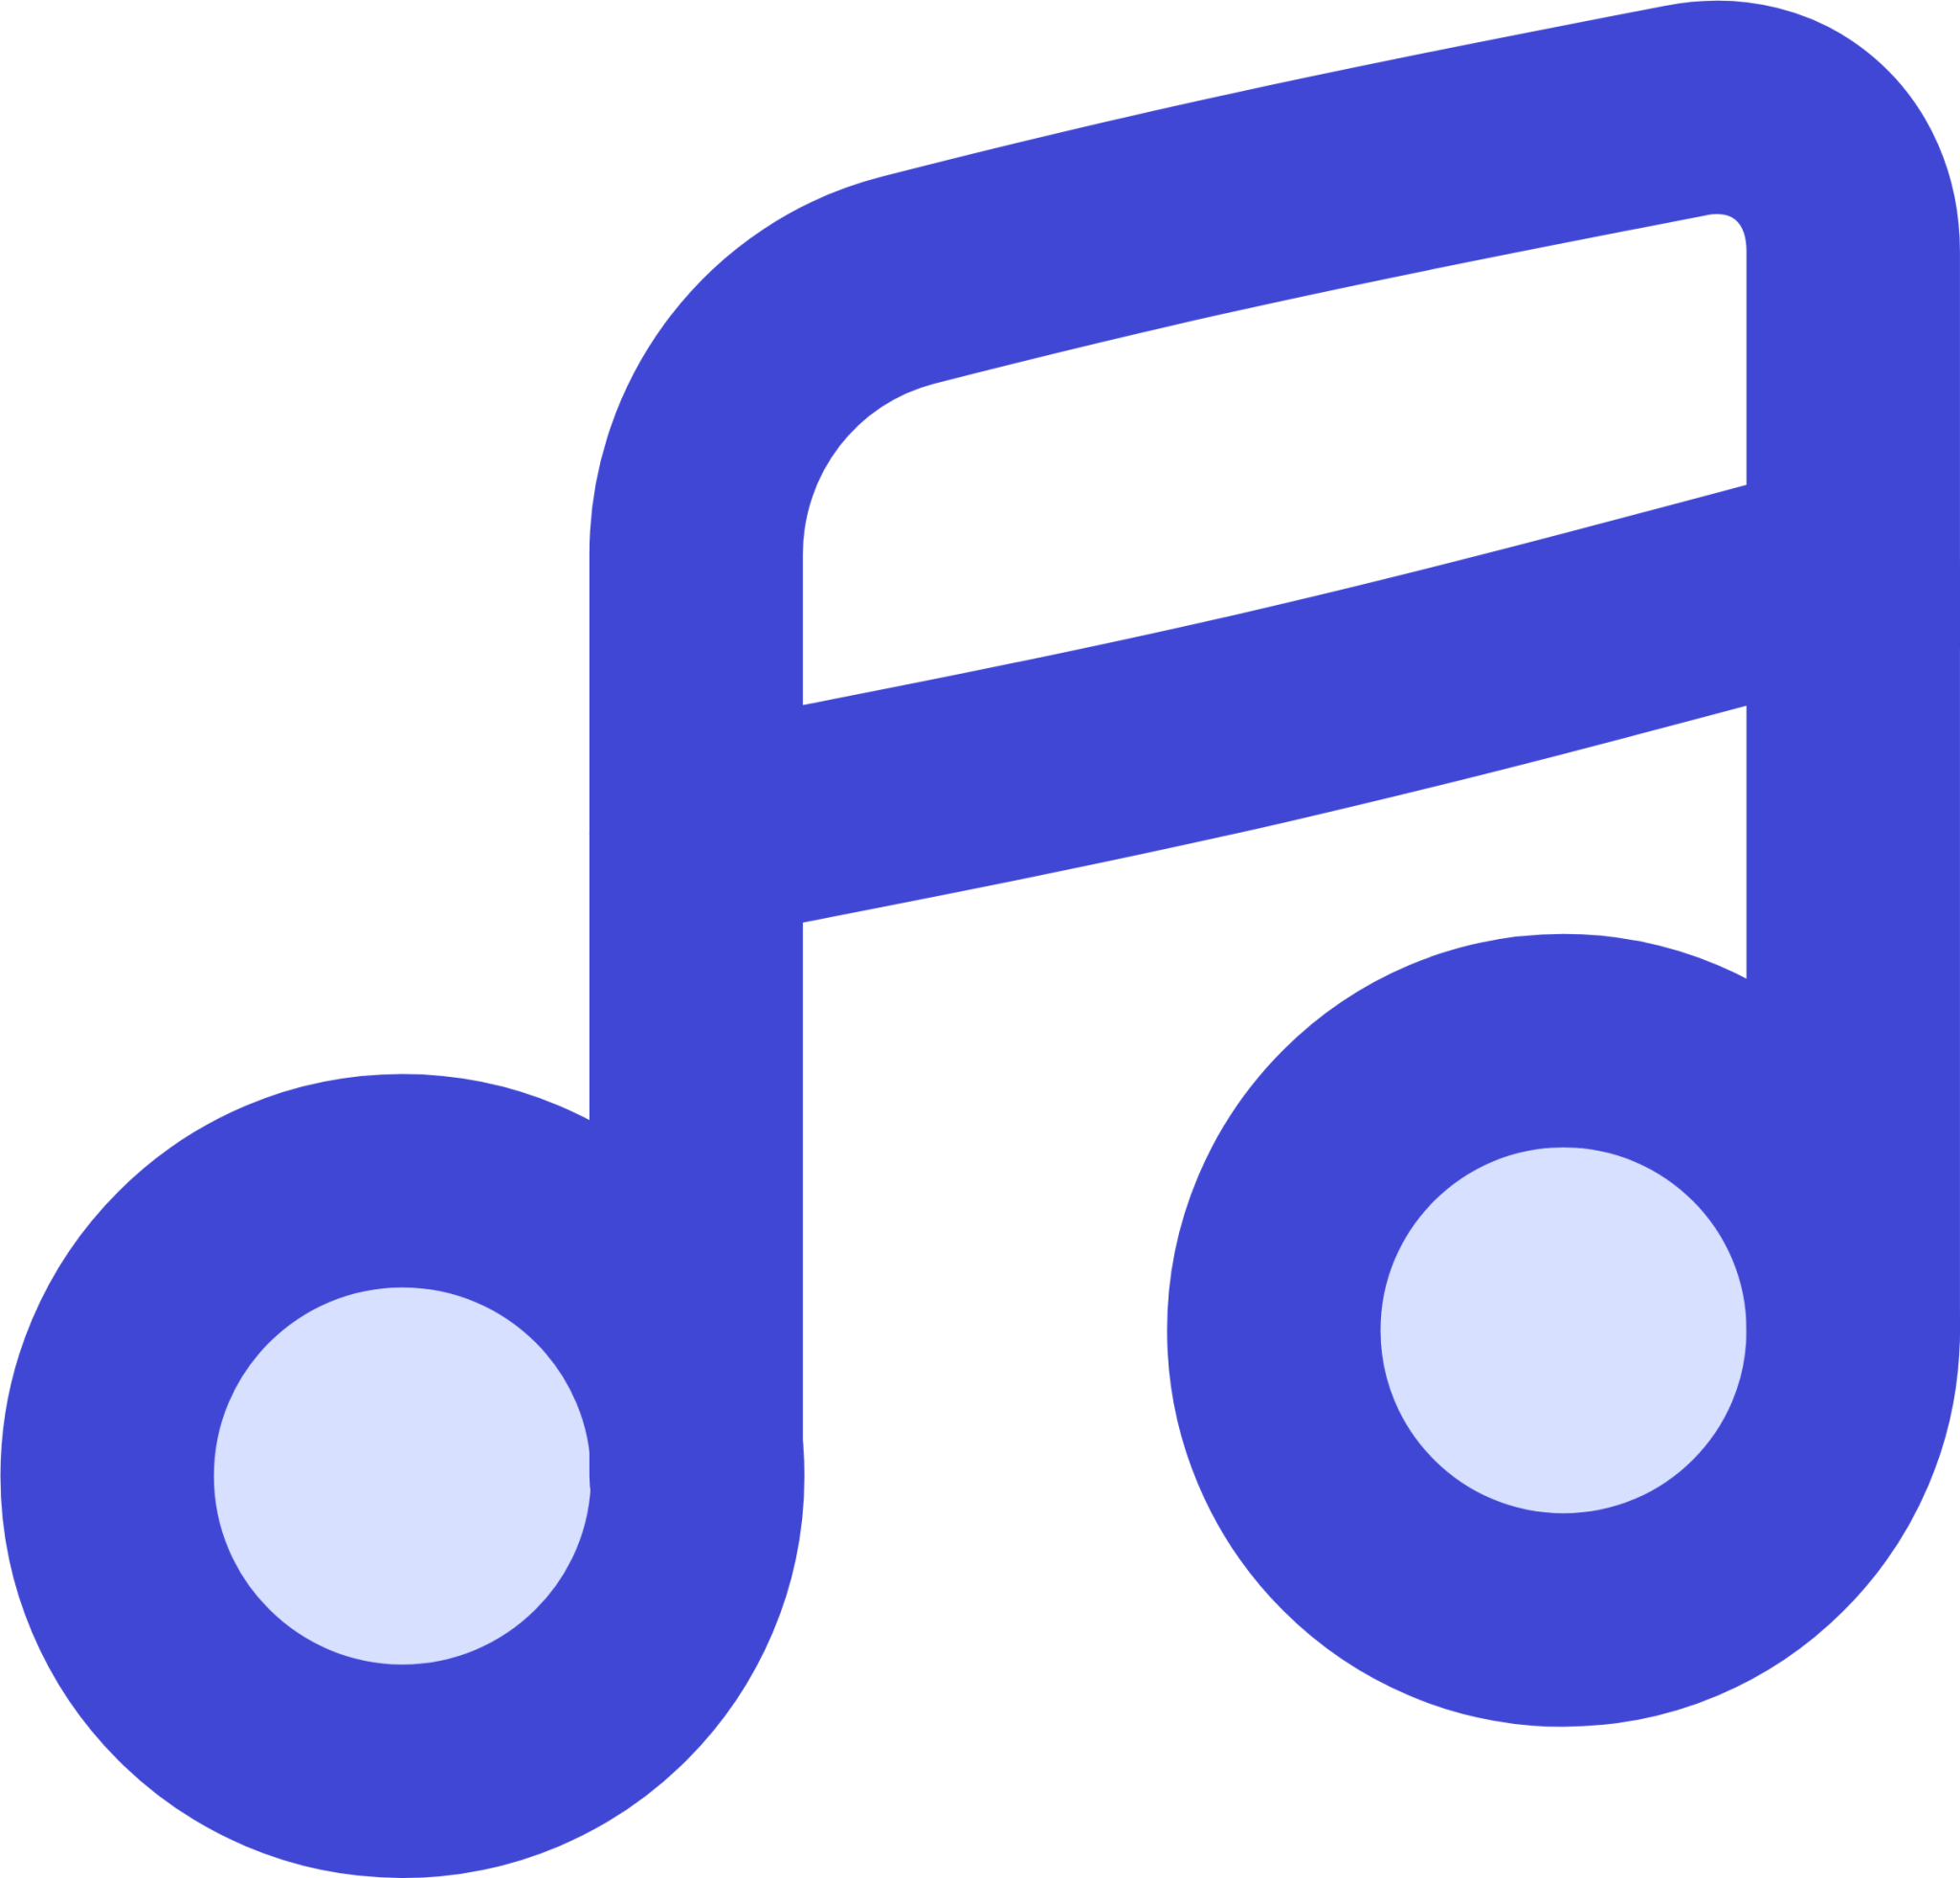 entertainment music note 2 music audio note icon